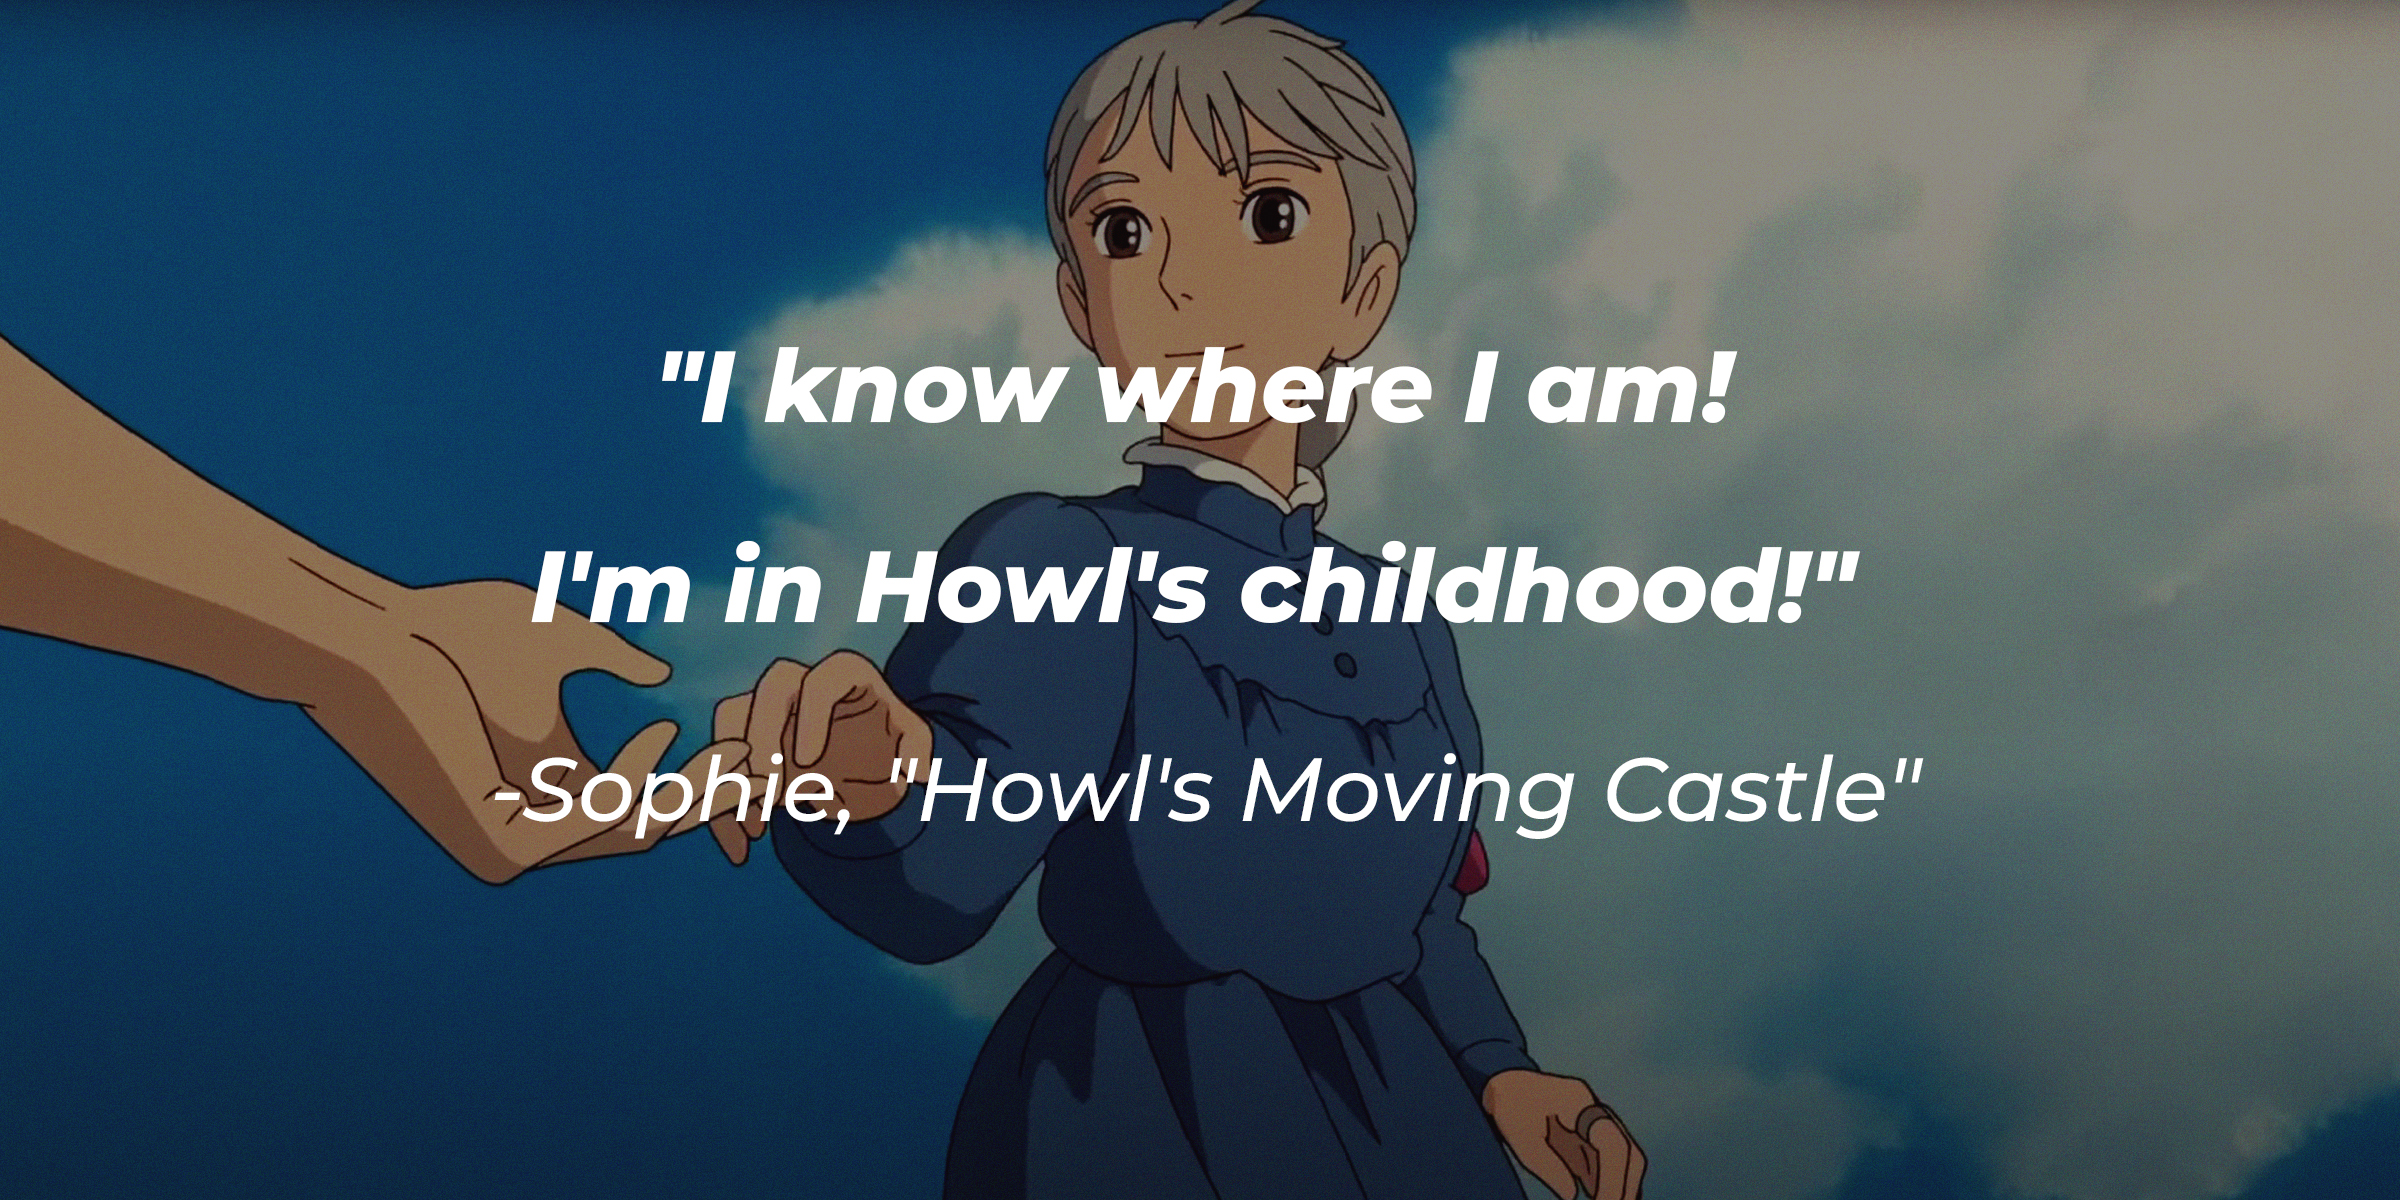 Sophie with her quote: "I know where I am! I'm in Howl's childhood!" | Source: Youtube.com/netflixanime